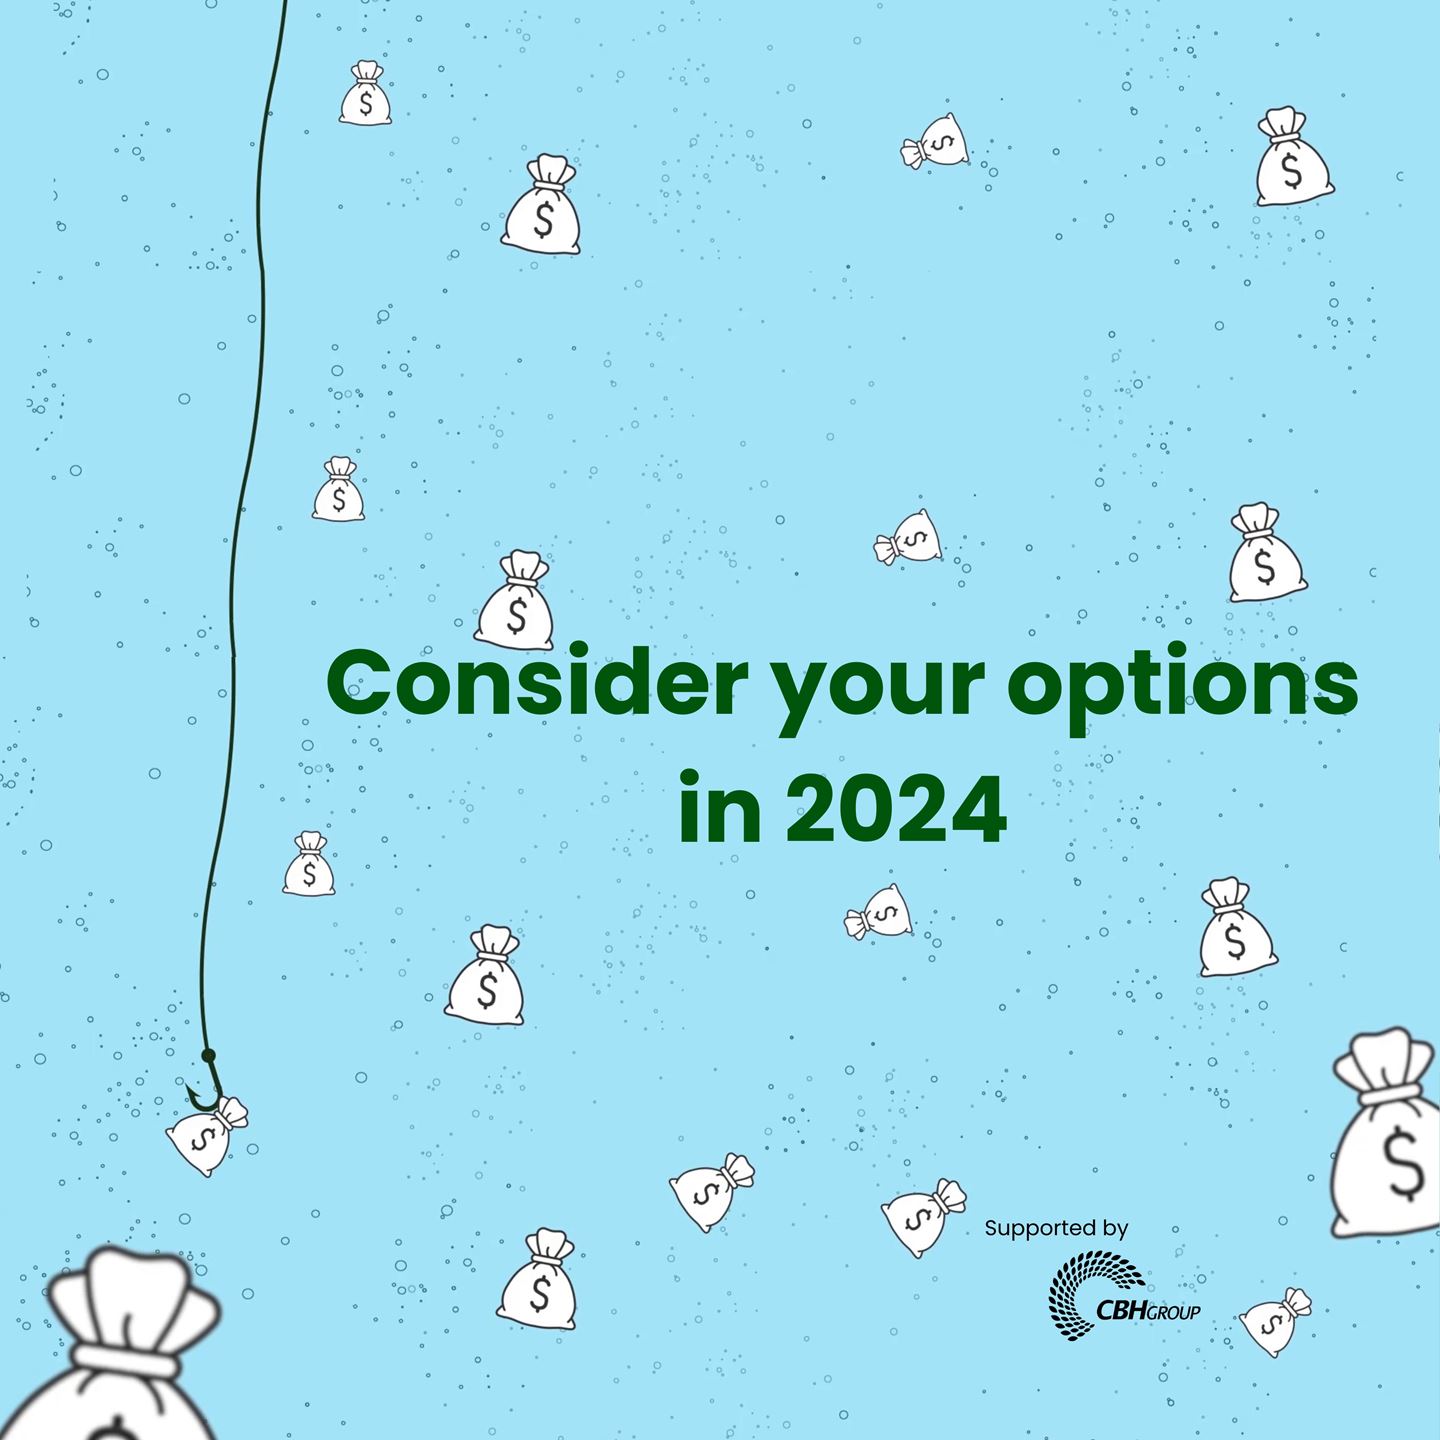 Consider your options in 2024